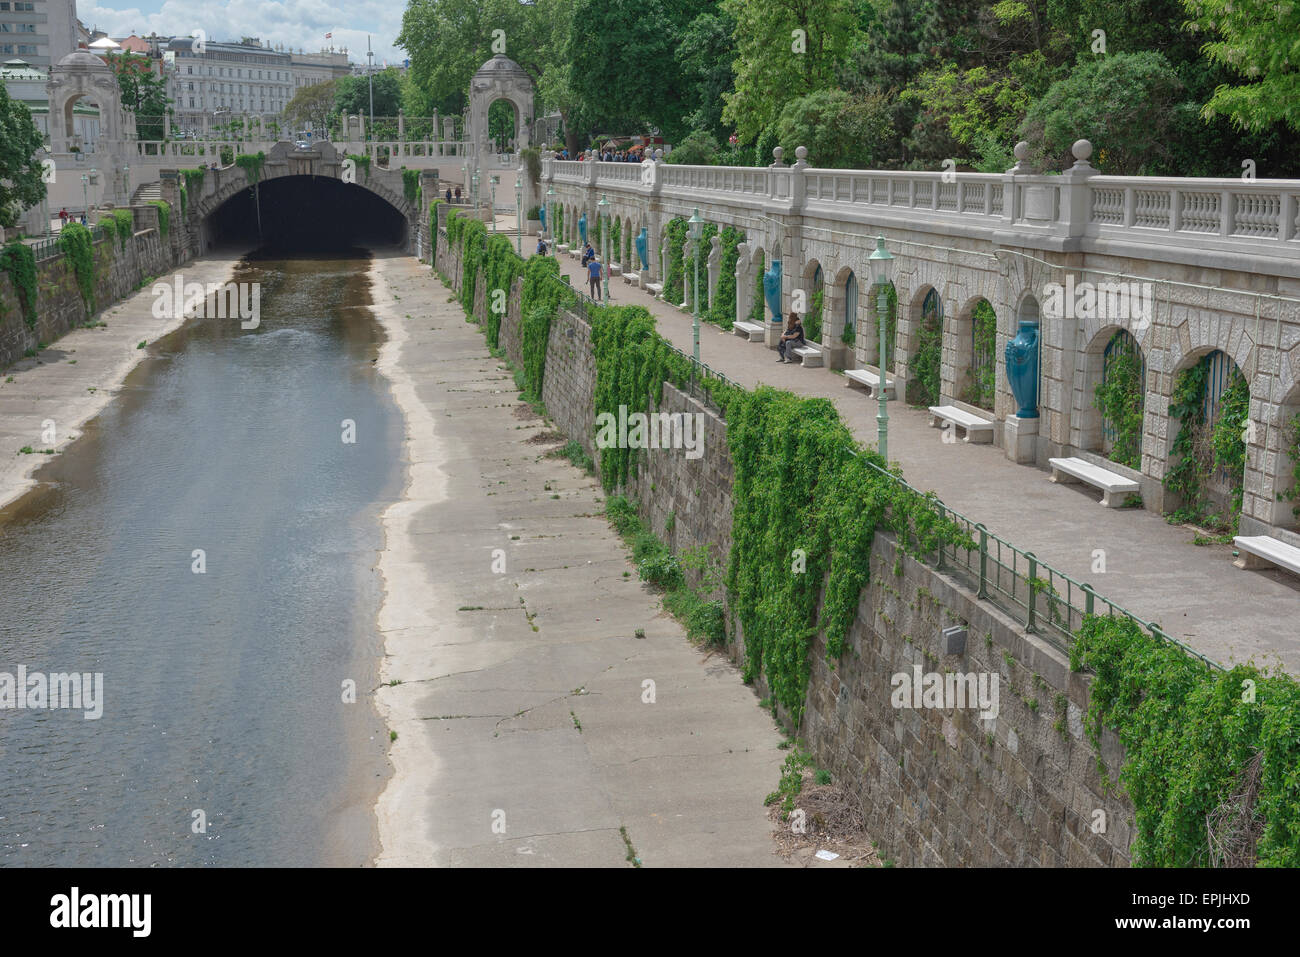 Vienna river canal, view of the Wien River running through the middle of the Stadtpark, one of Vienna's popular city centre parks, Austria. Stock Photo